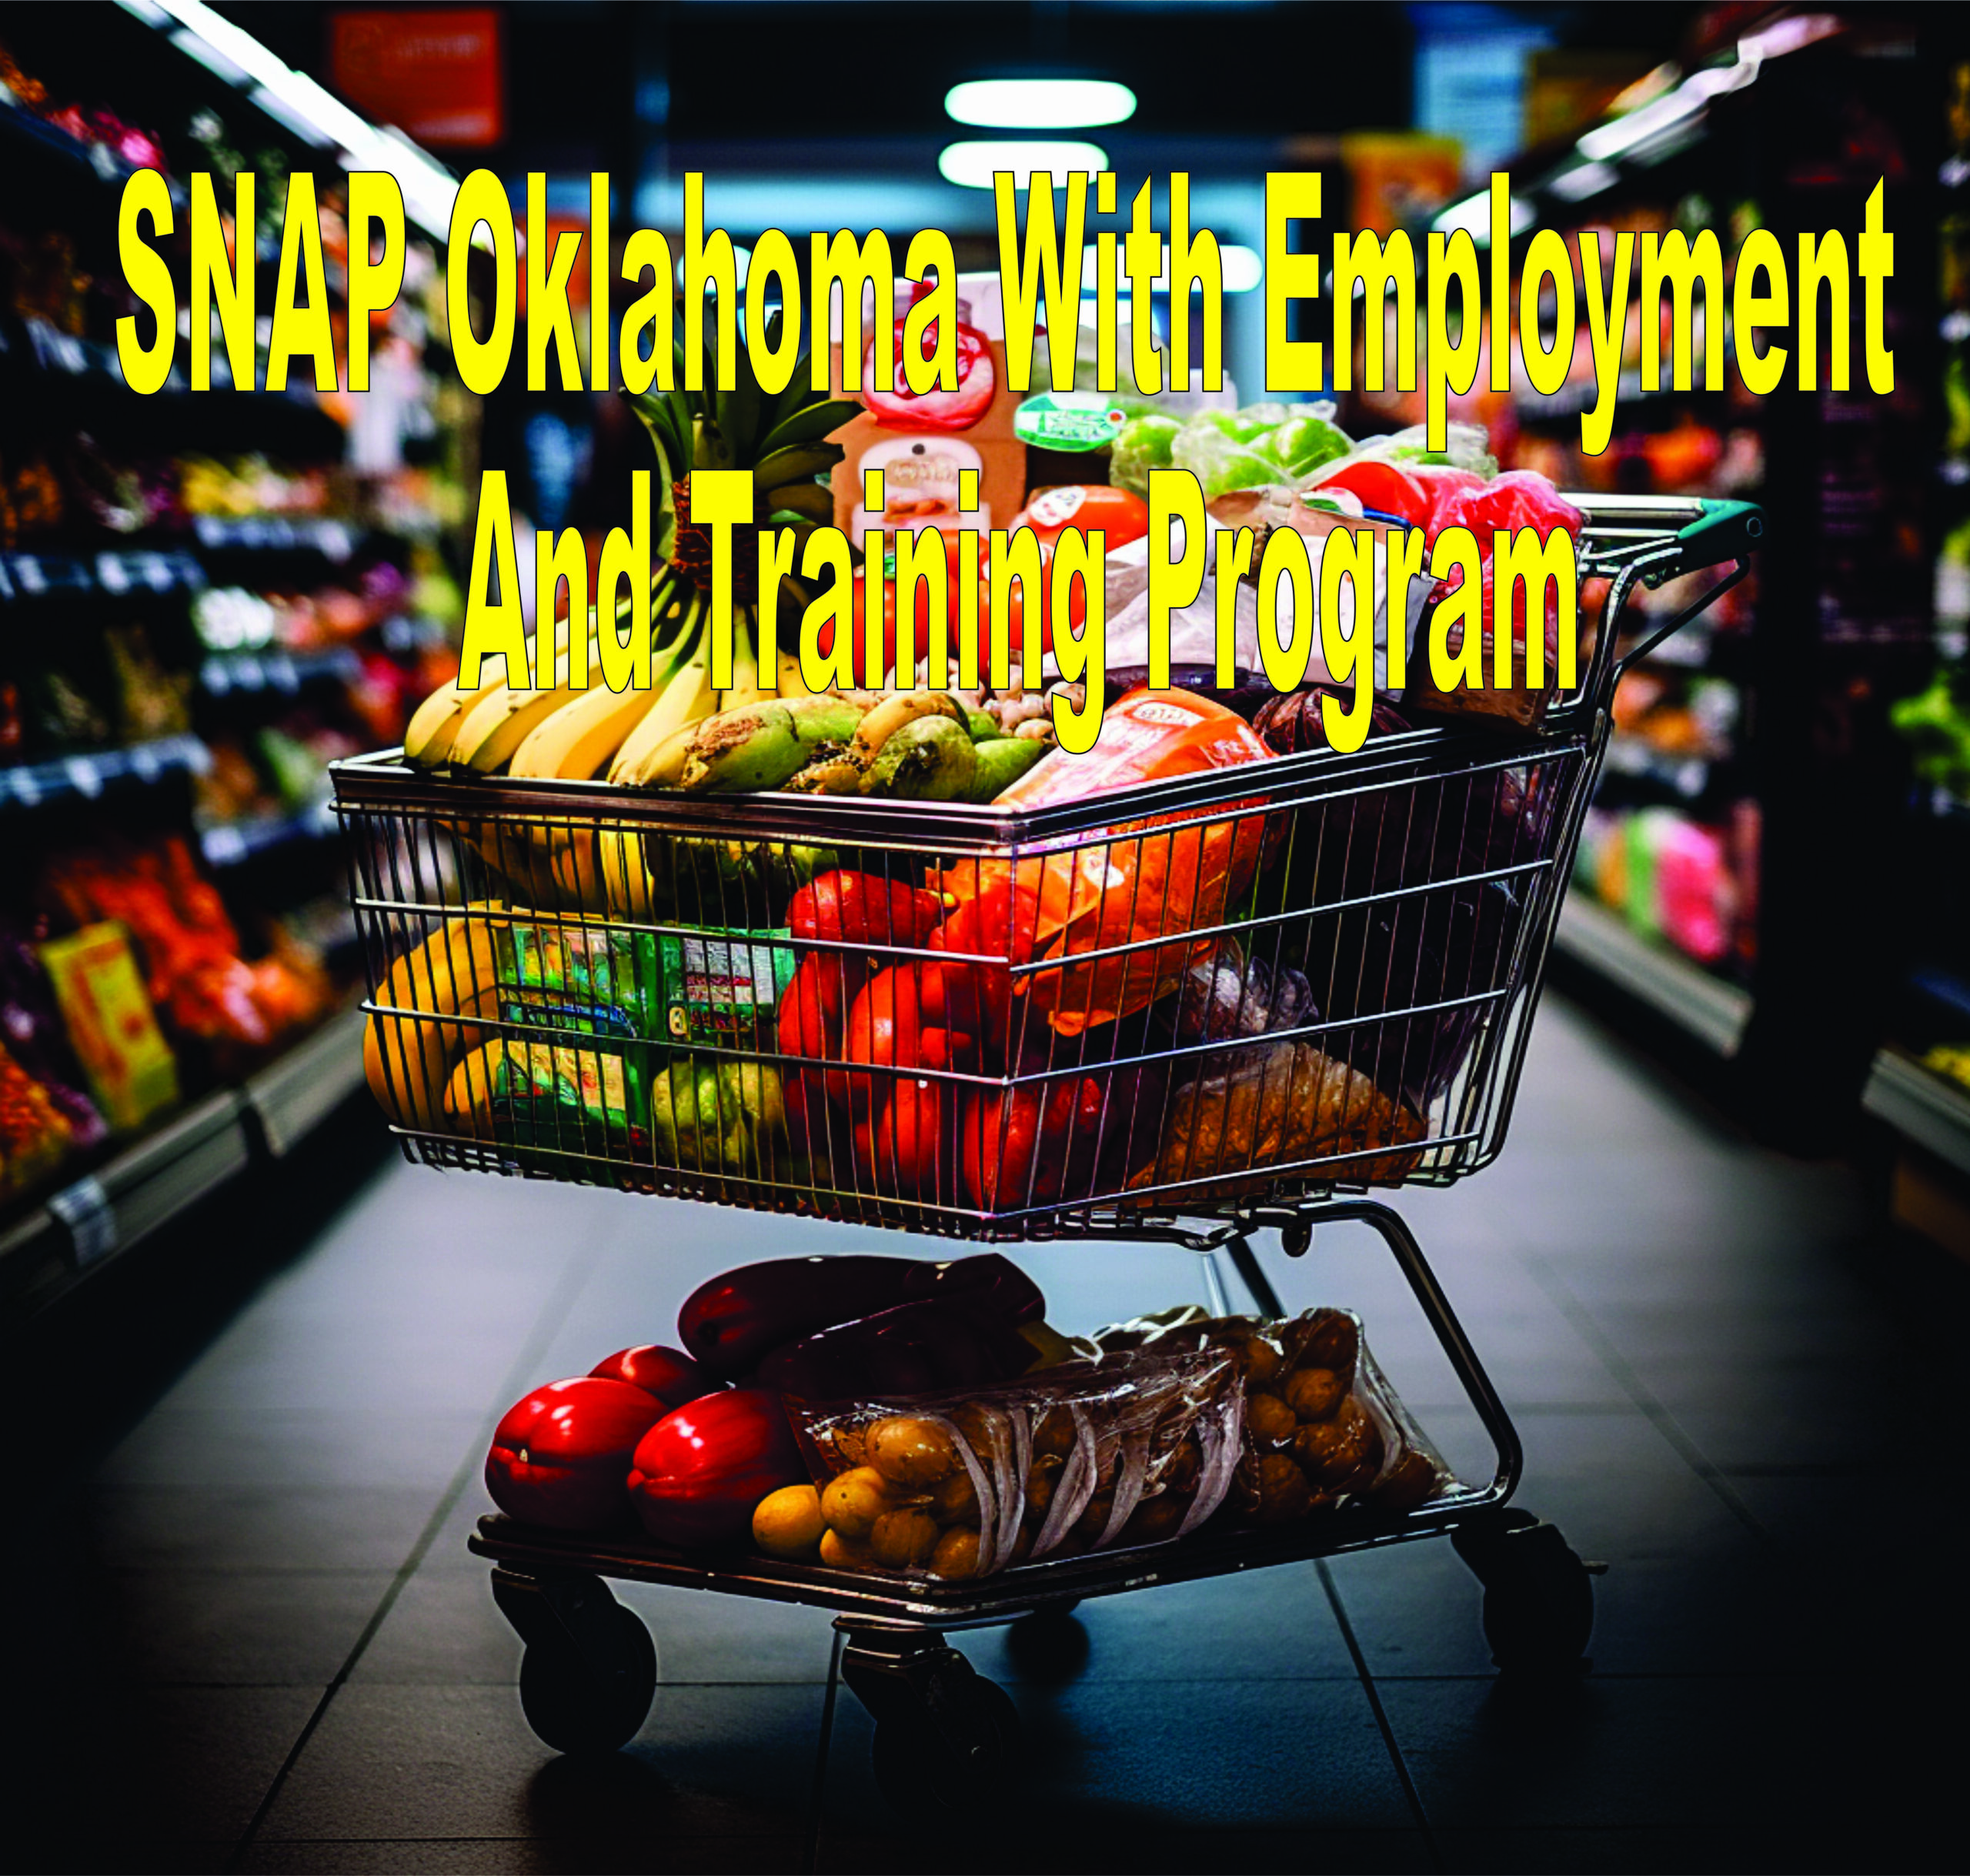 Snap Oklahoma With Employment And Training Program